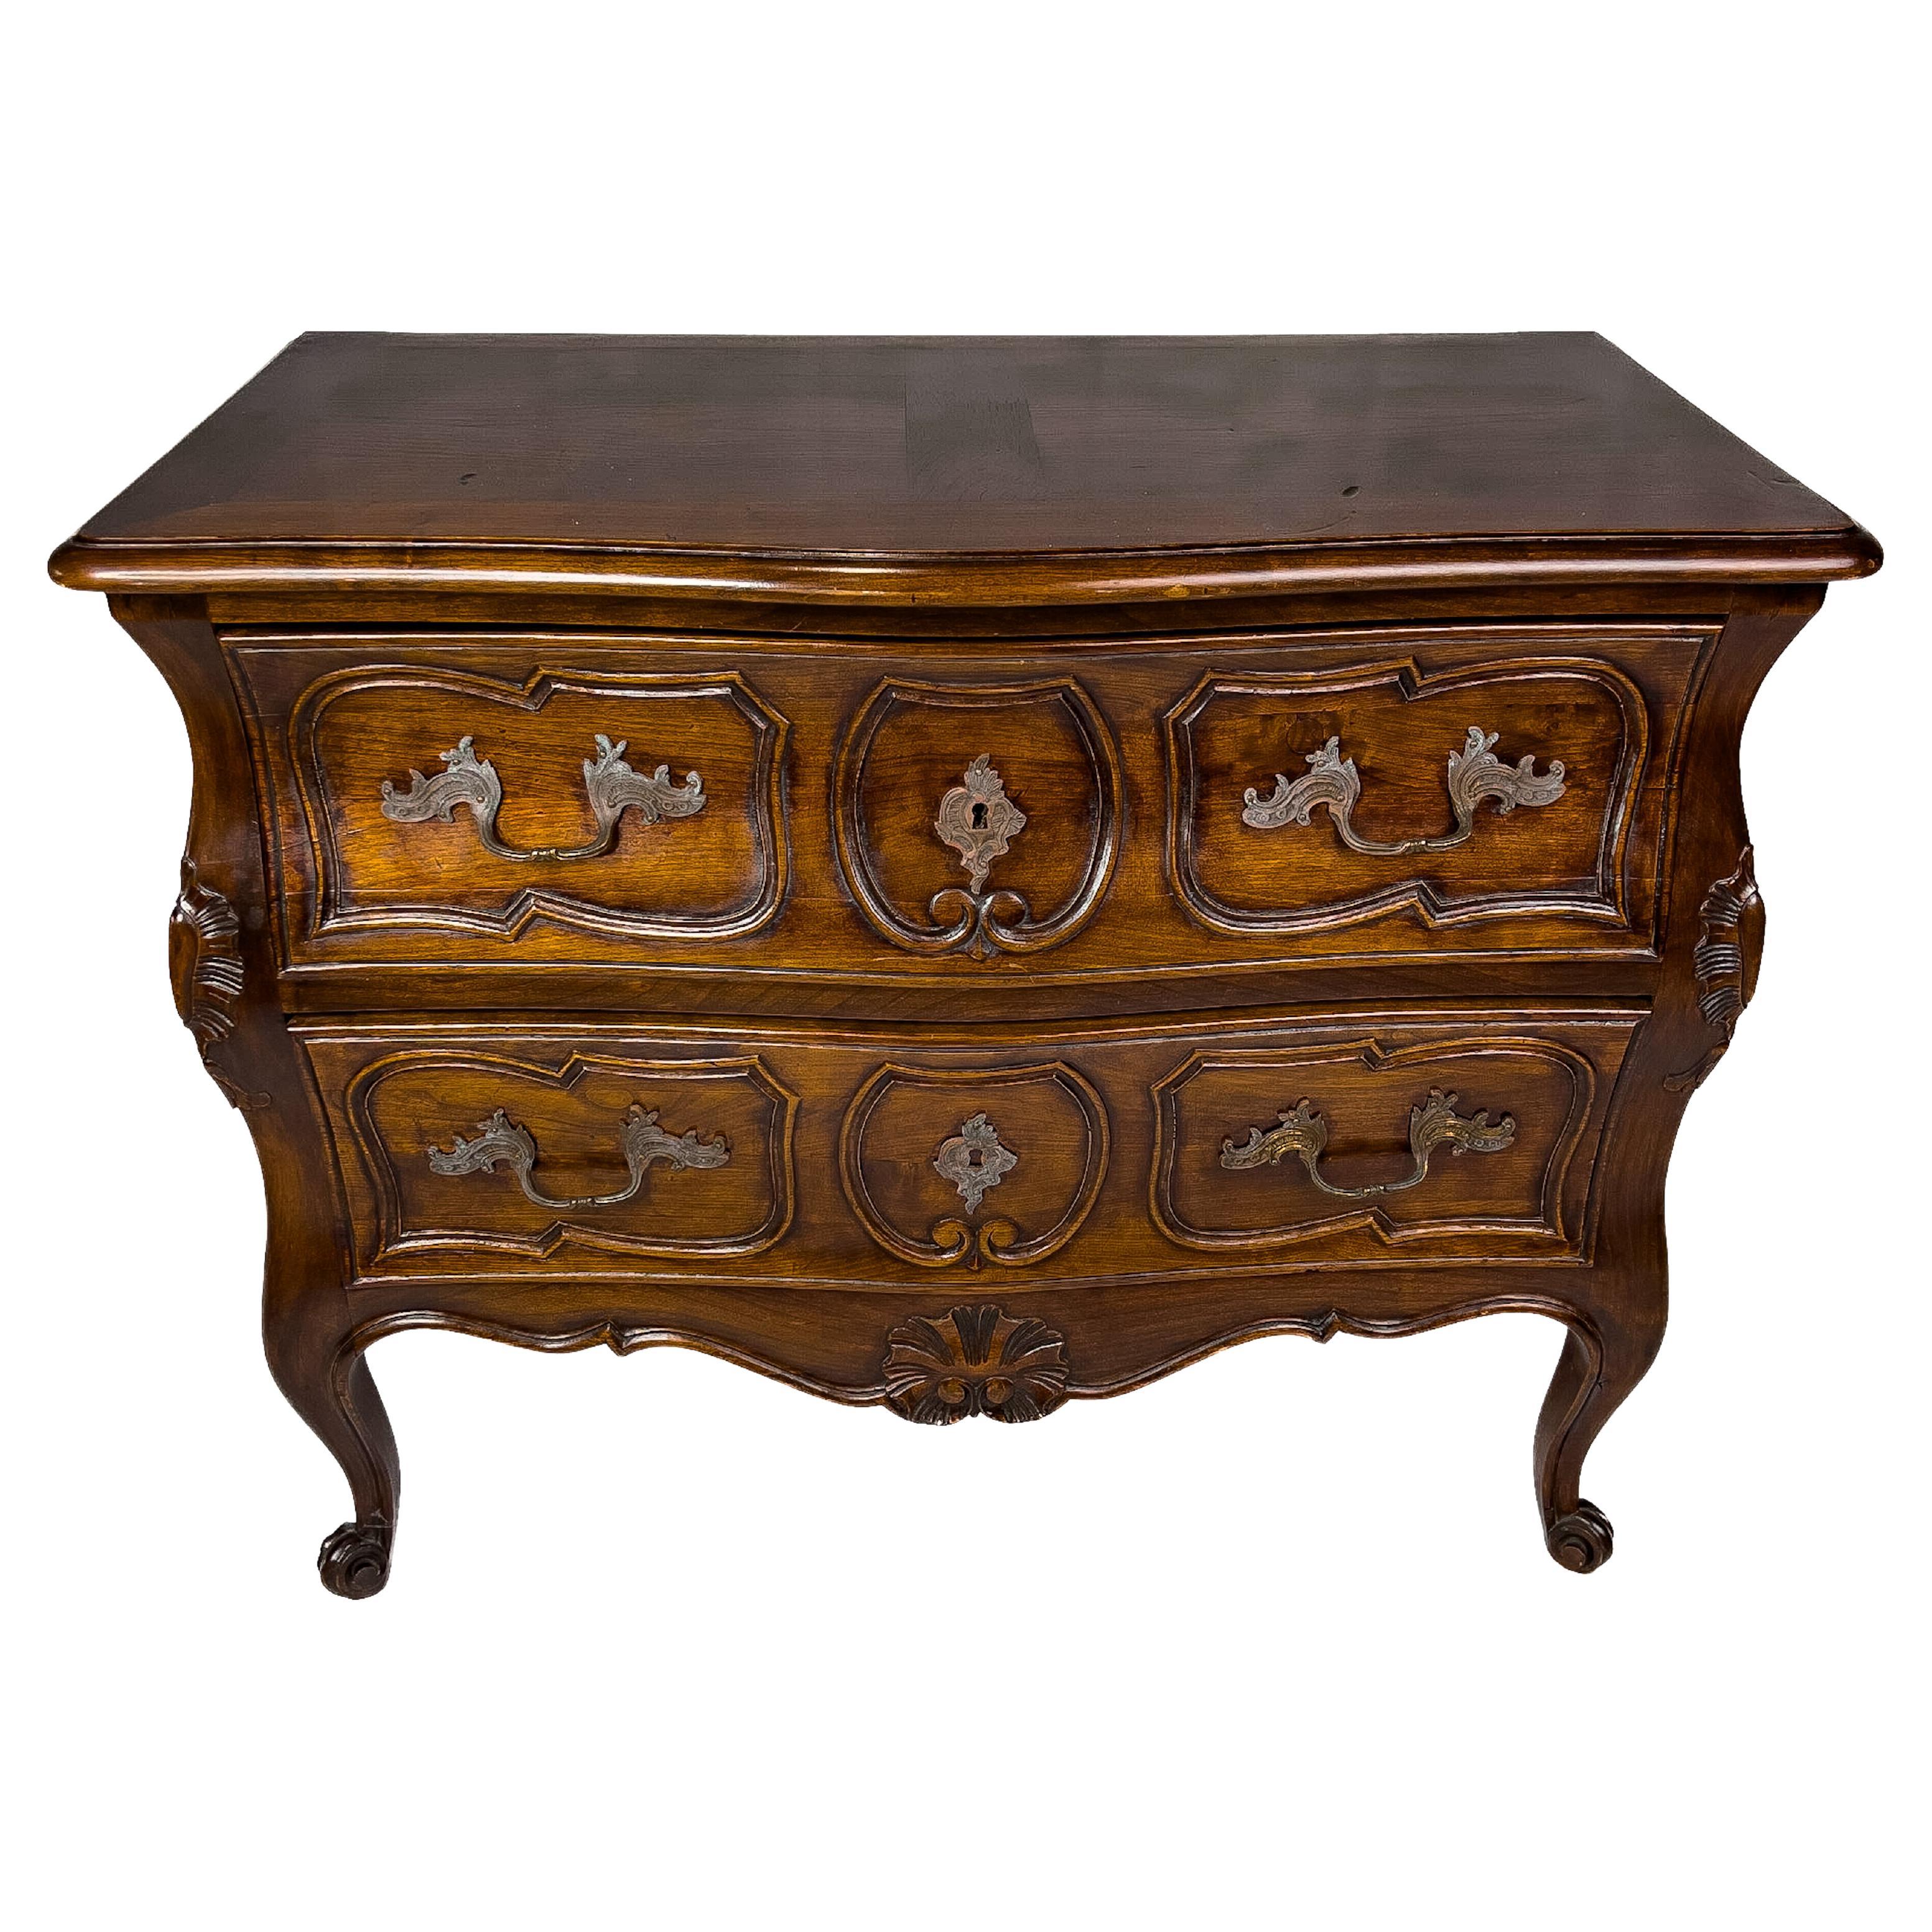 20th C. Louis XV Style French Commode